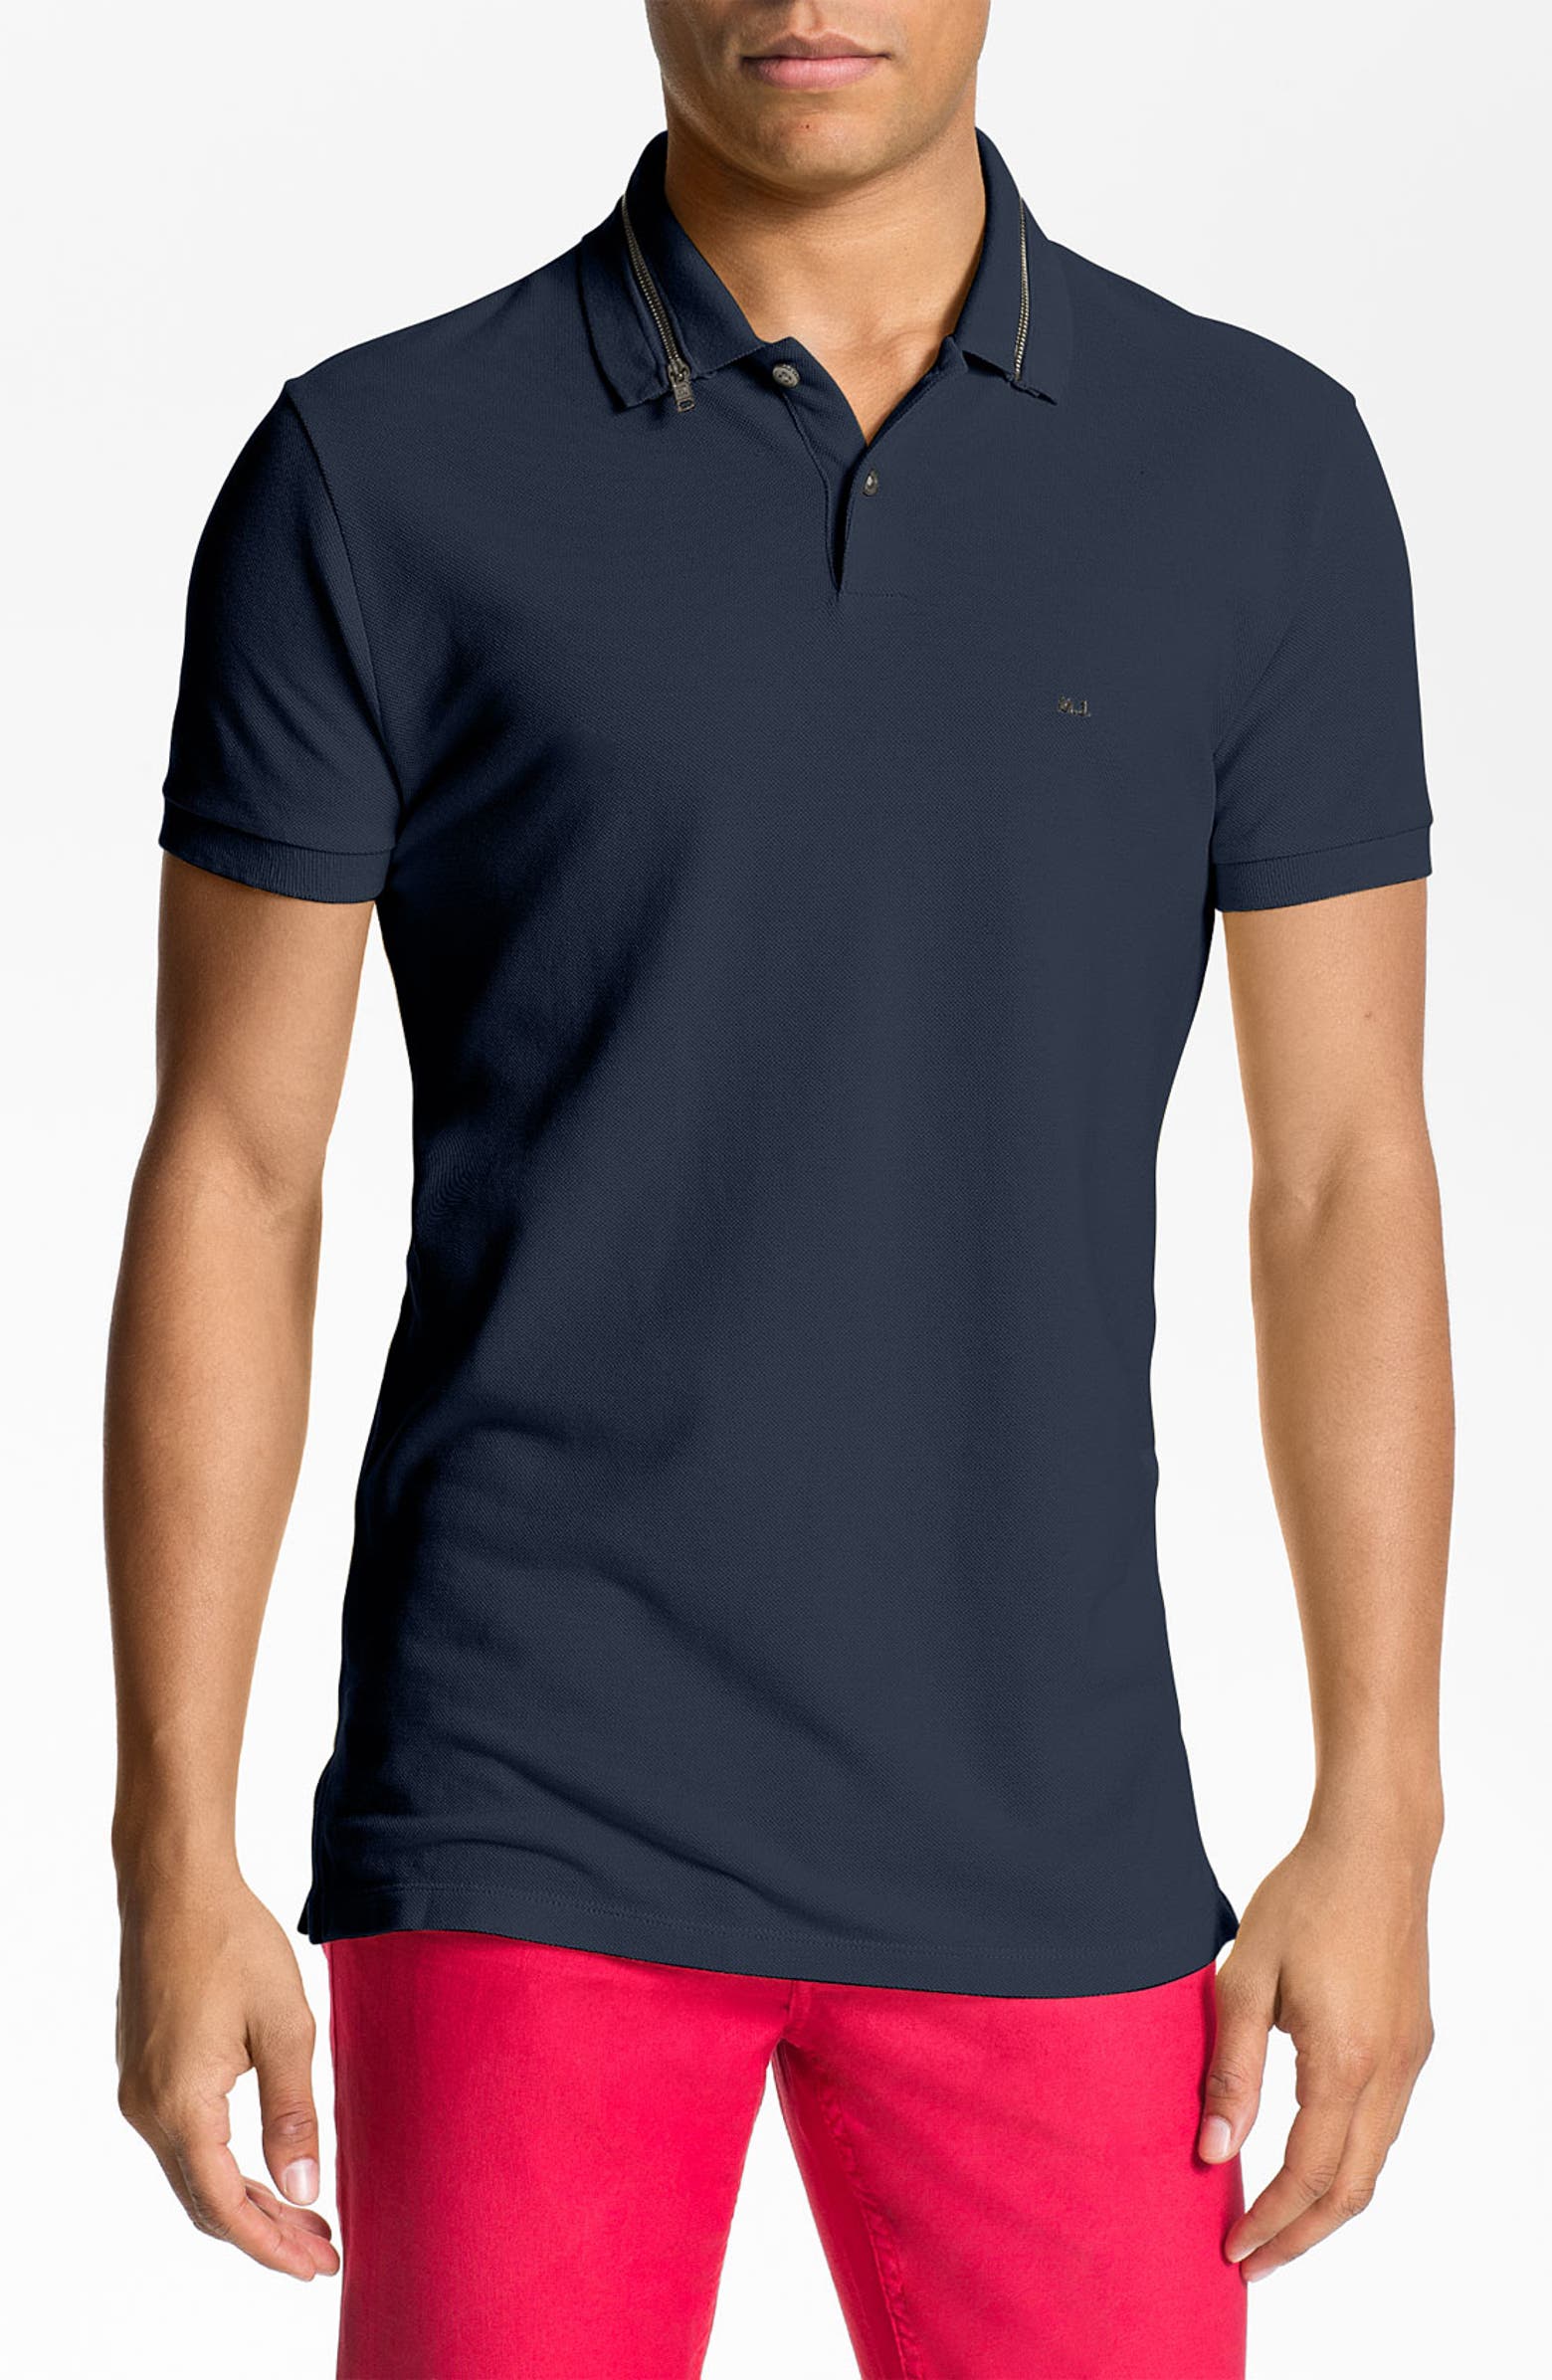 MARC BY MARC JACOBS Zip Collar Polo | Nordstrom